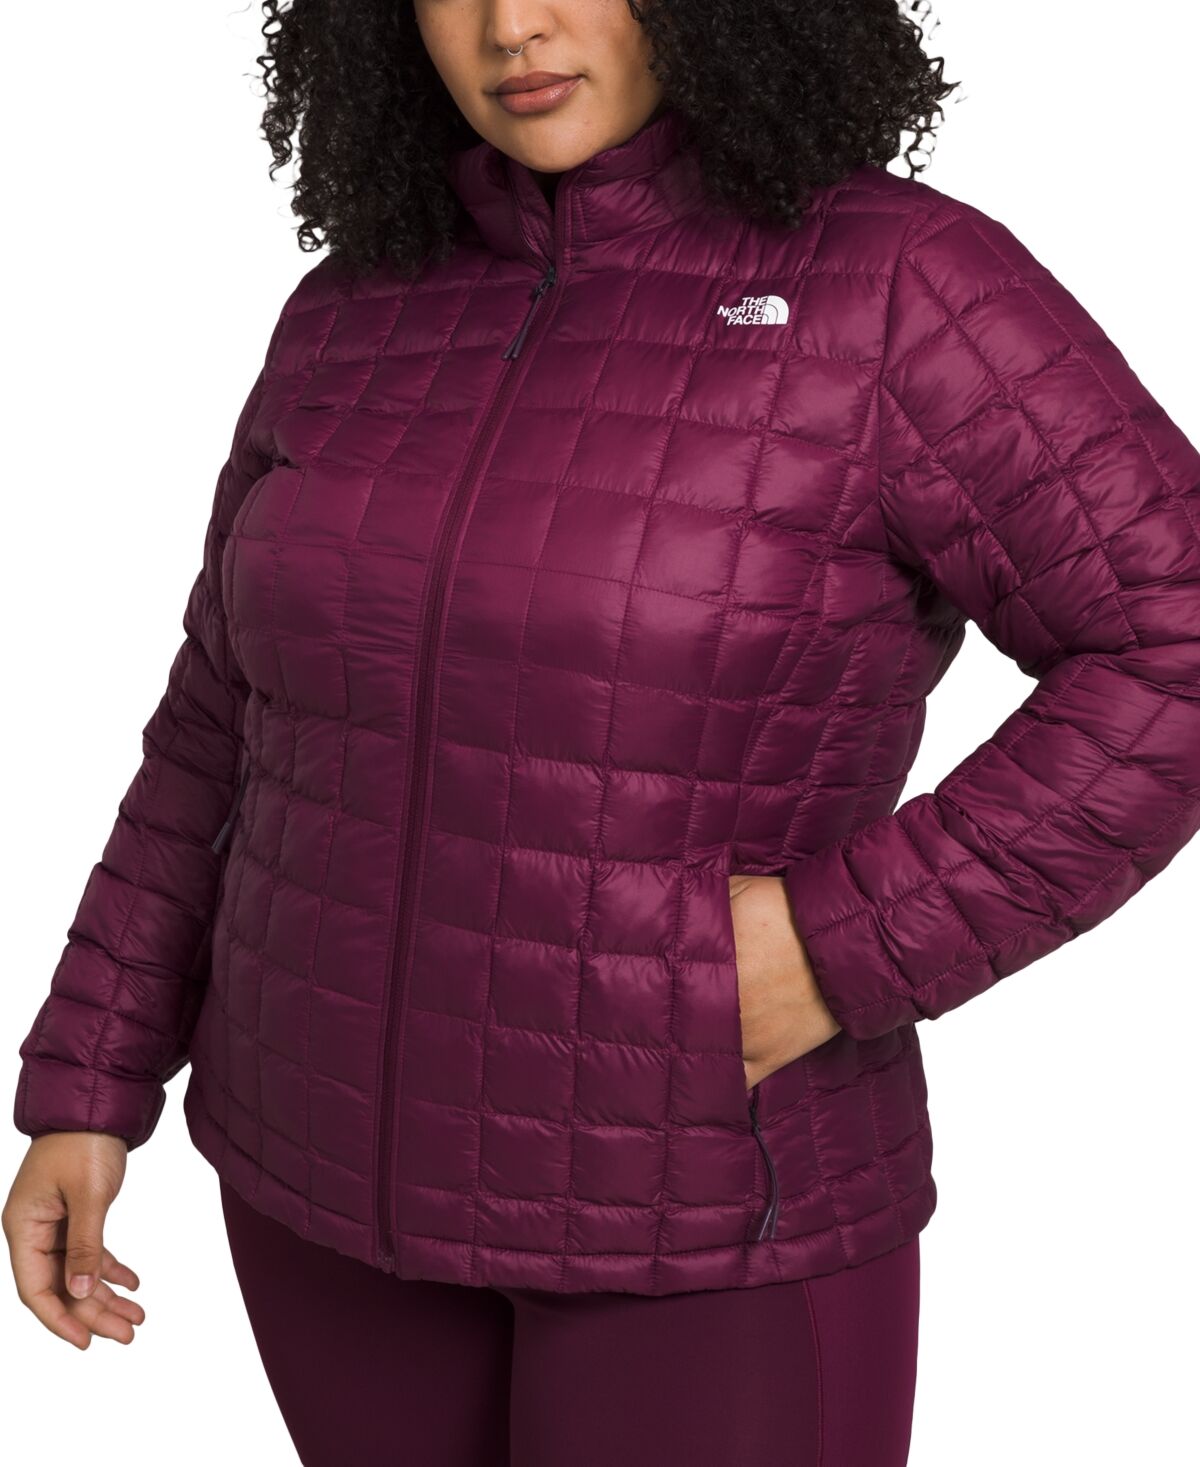 The North Face Plus Size Quilted Zip-Up Puffer Jacket - Boysenberry